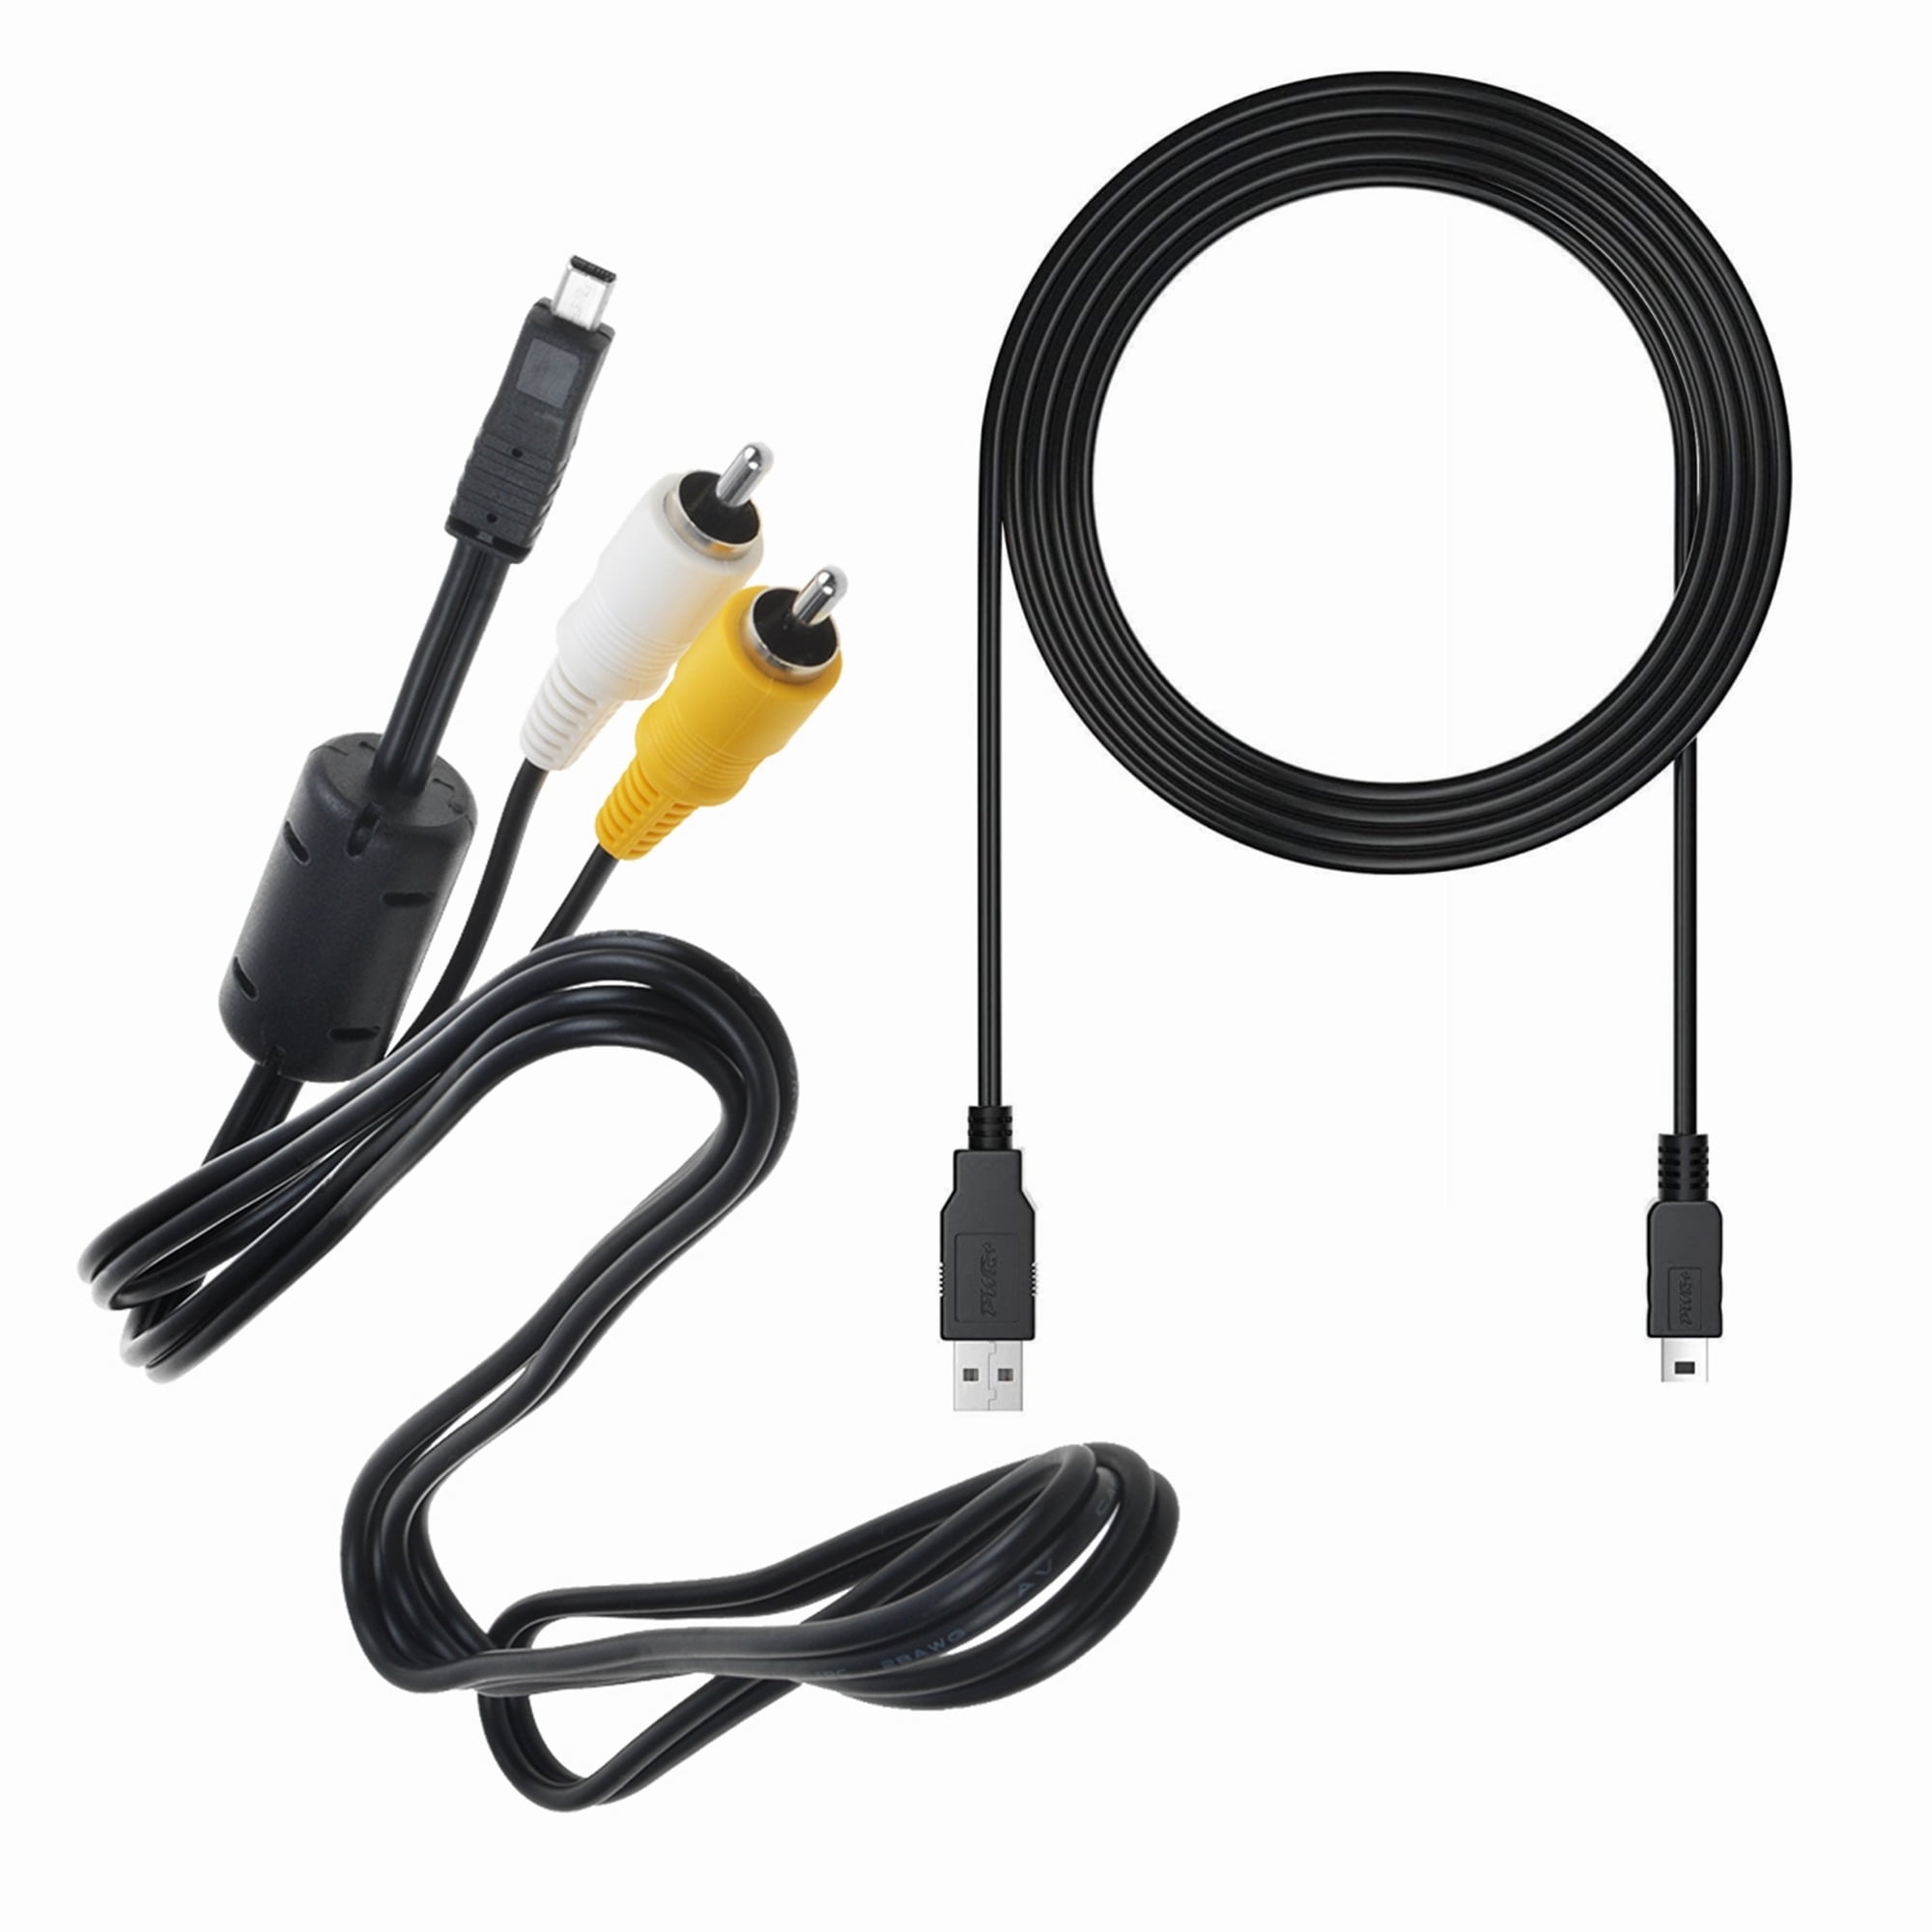 Fujifilm Finepix Z Series USB Camera Lead Cable Select Your Exact Model 